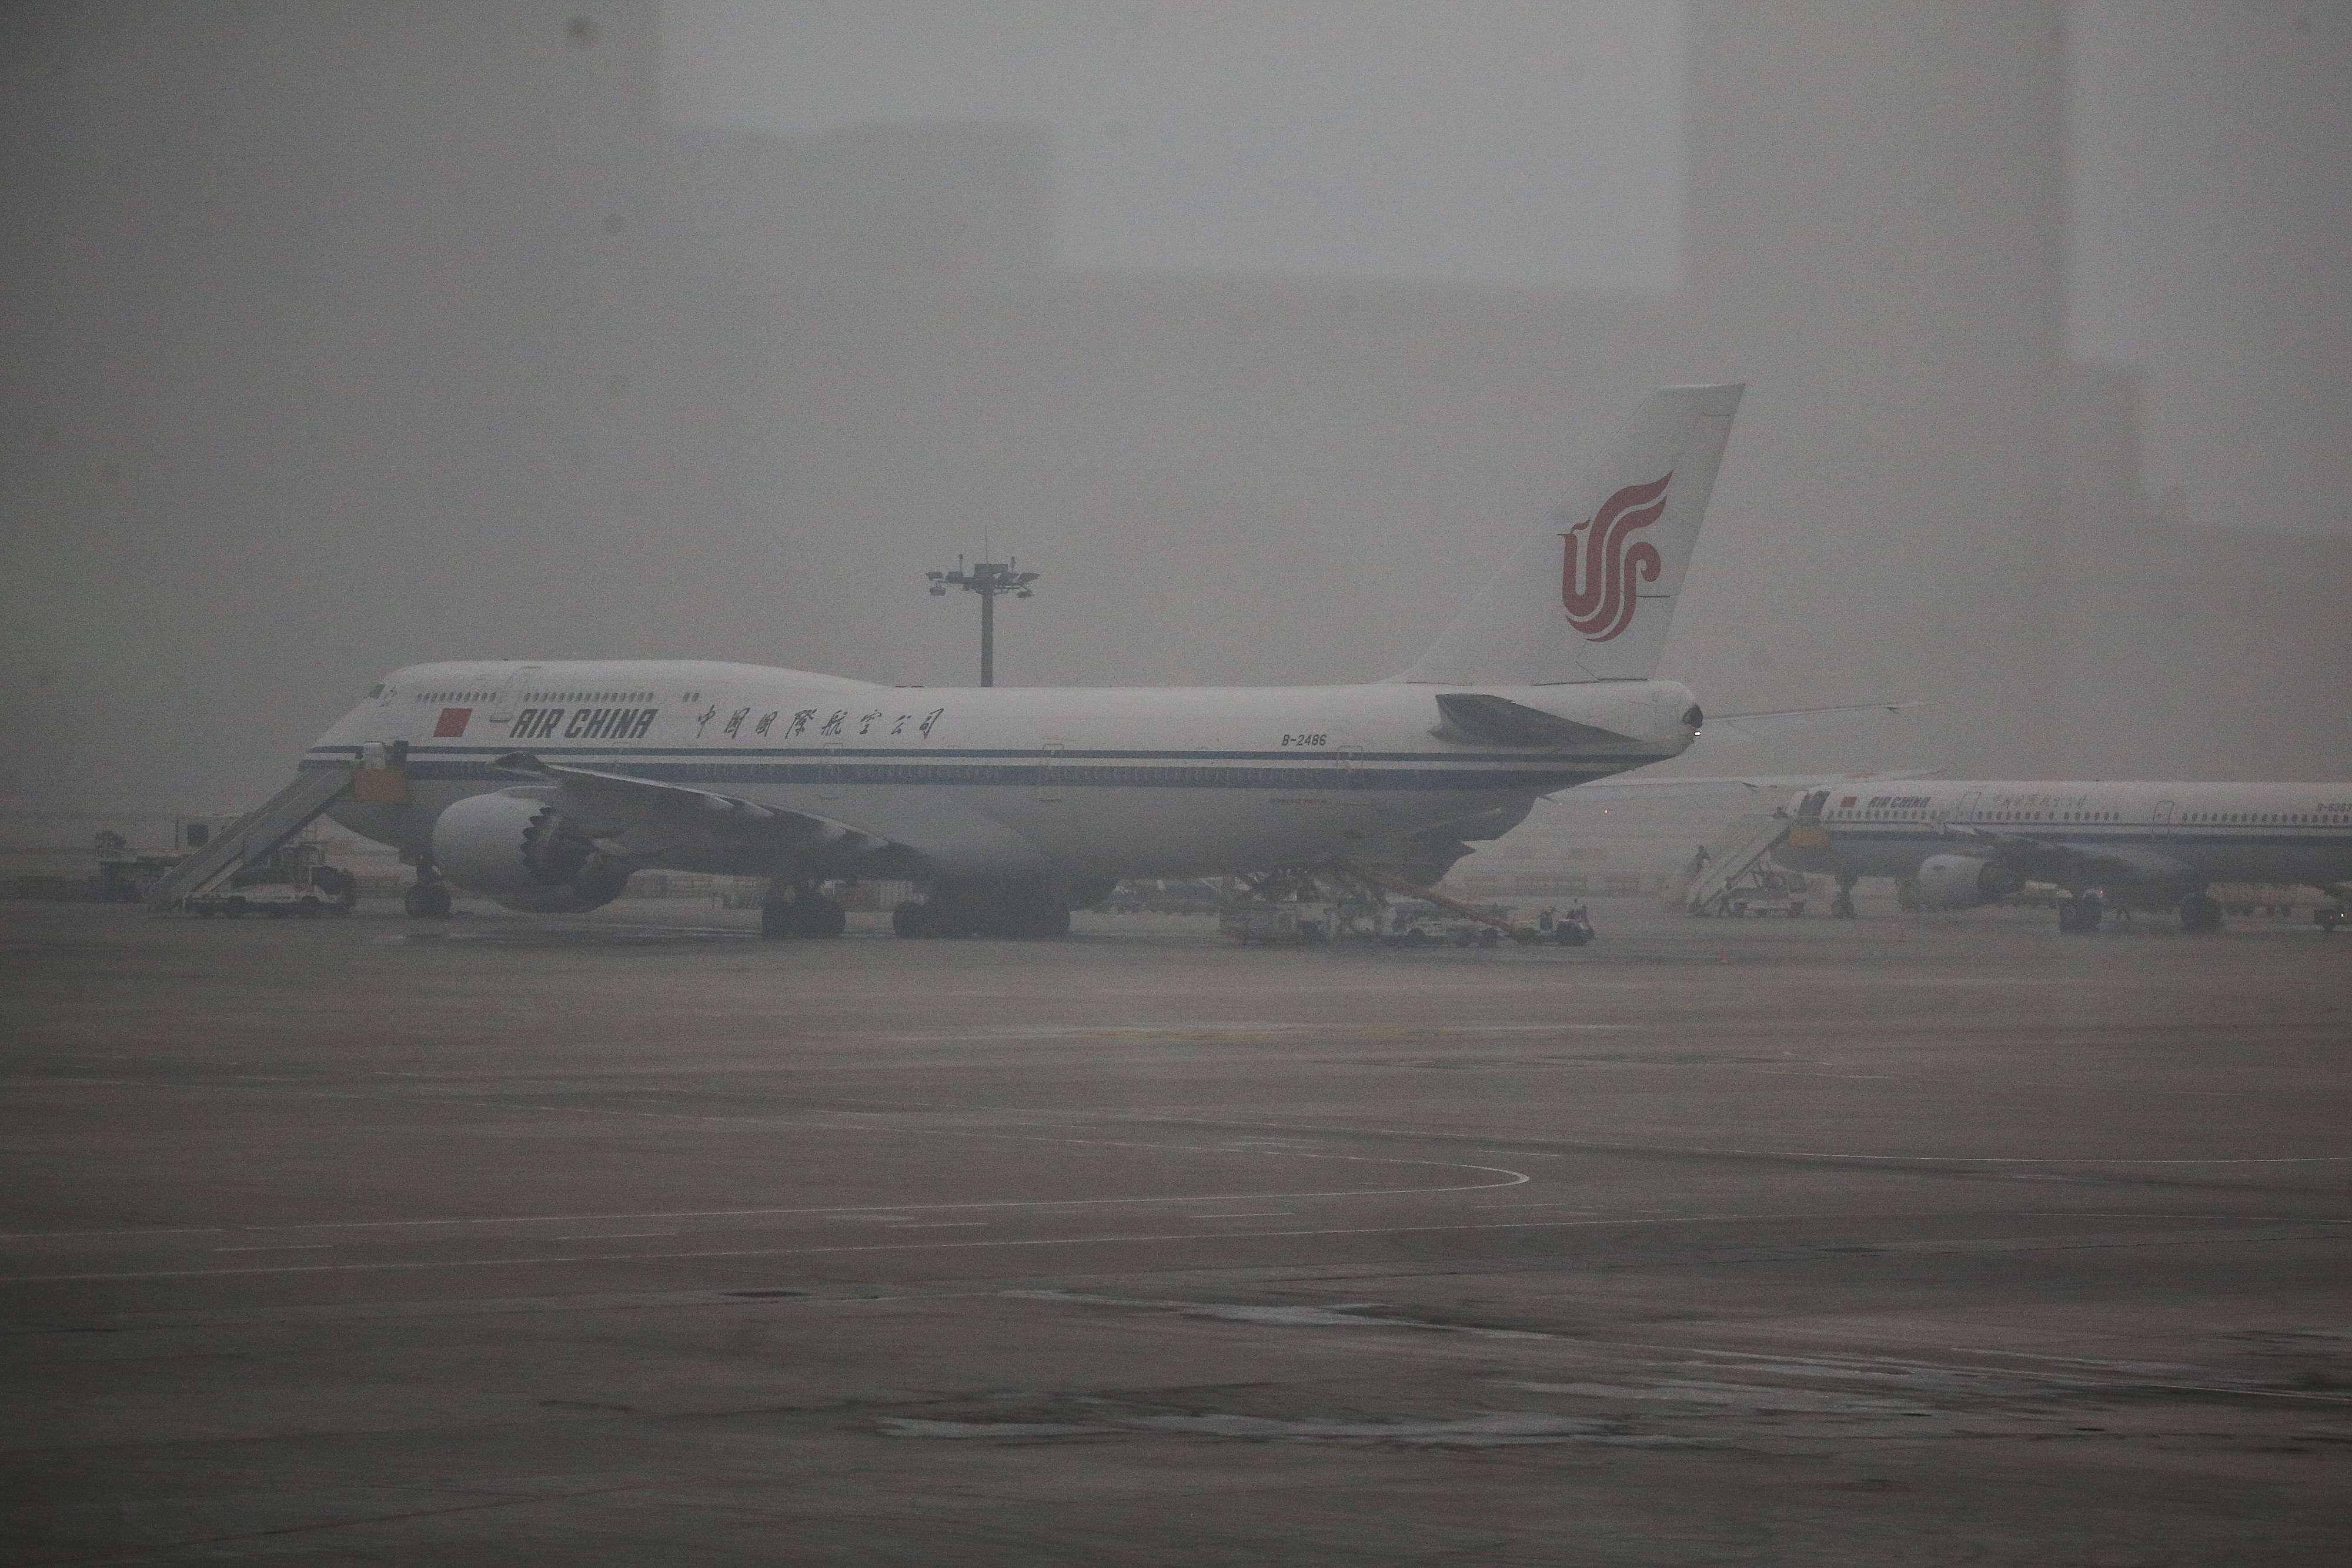 December 16, 2016, Beijing Airport. One of the worst days of the year for visibility in the city and its air quality. Photo: SCMP